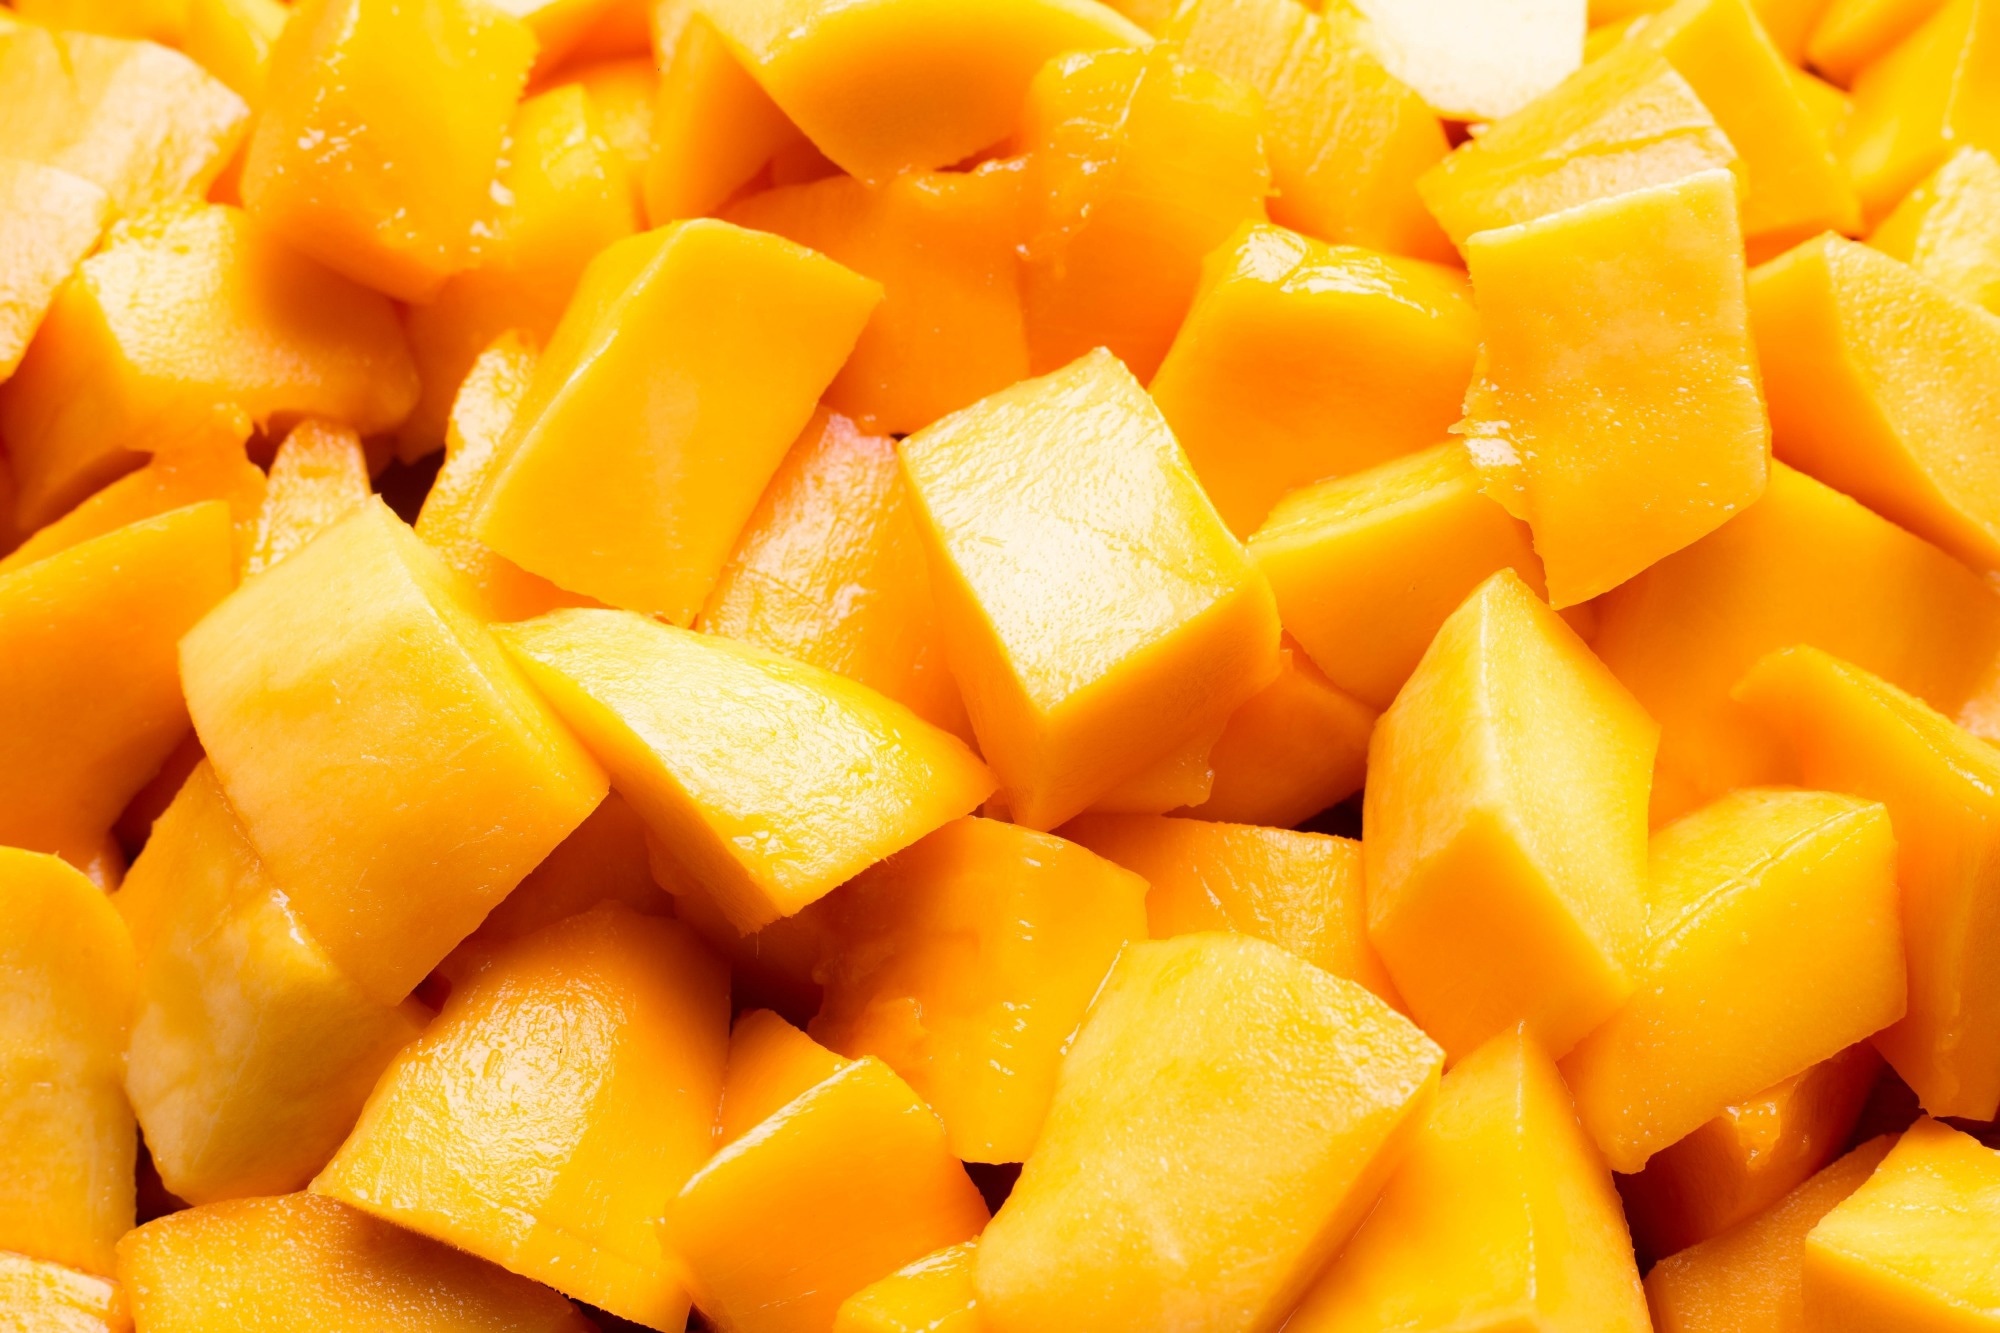 Study: Mango Consumption Was Associated with Higher Nutrient Intake and Diet Quality in Women of Childbearing Age and Older Adults. Image Credit: Parkin Srihawong/Shutterstock.com